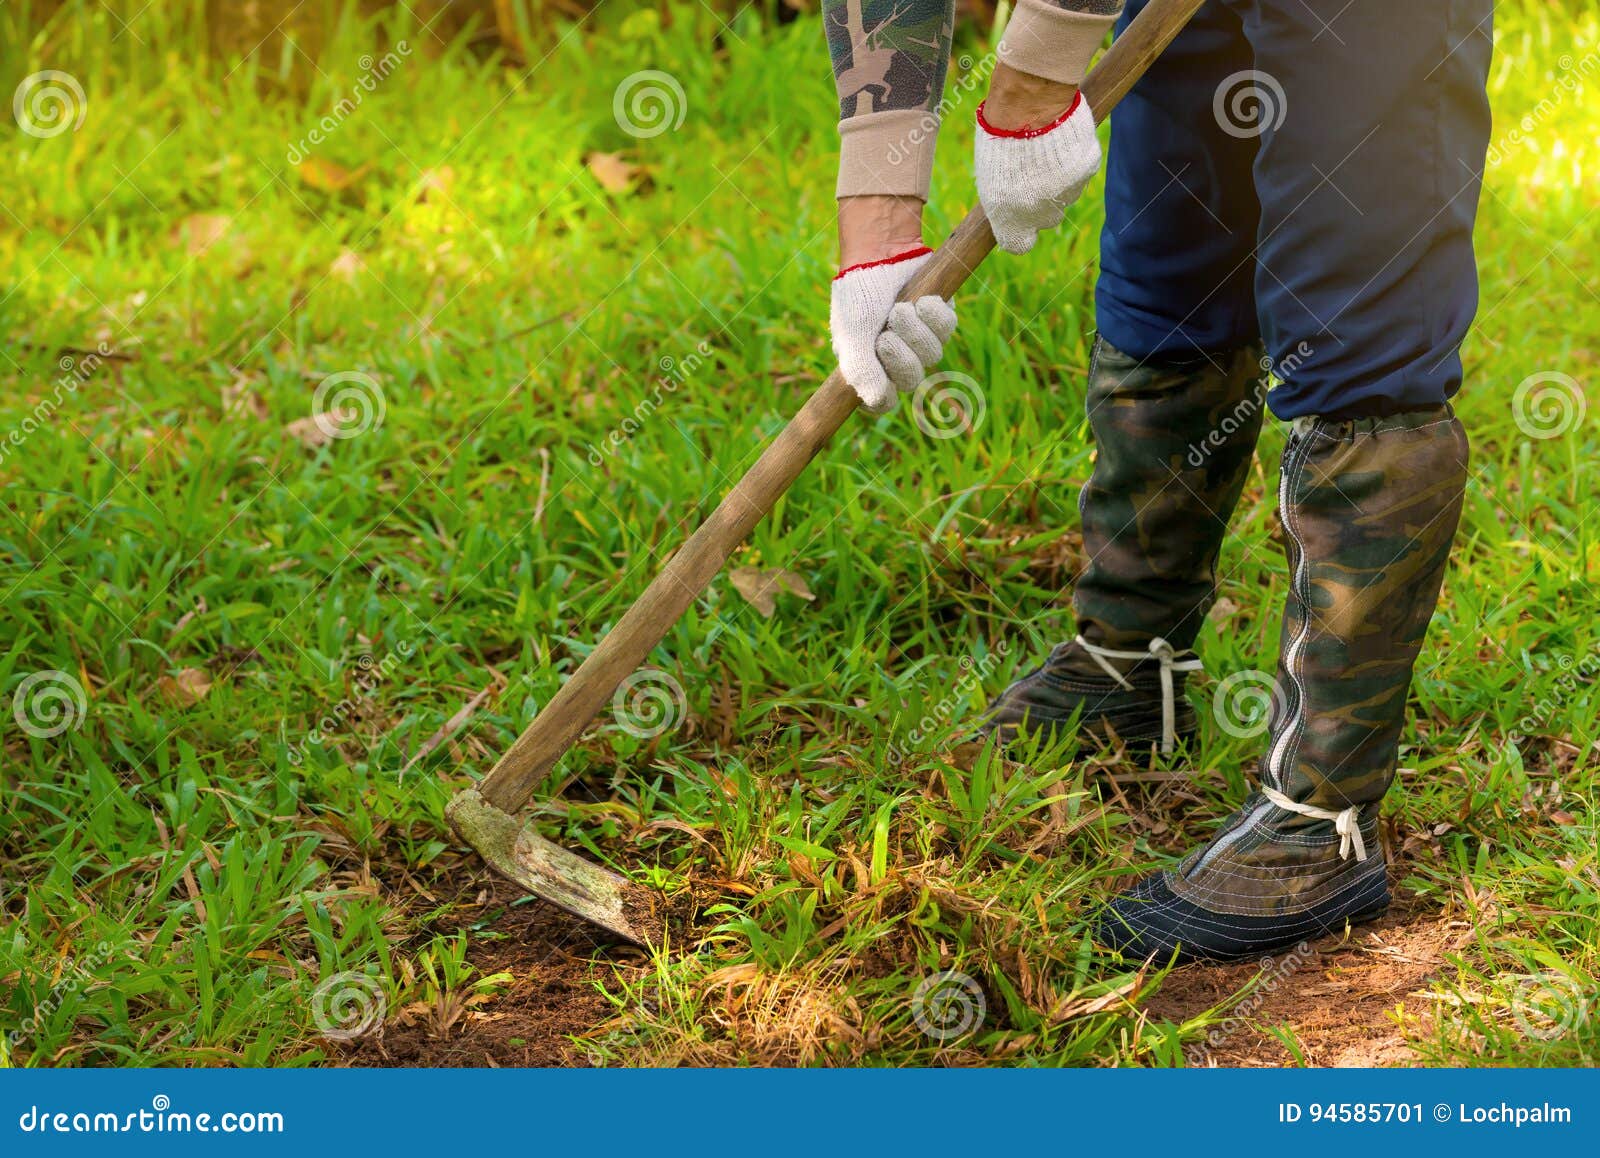 Man Weeding His Garden with Hoe. Stock Image - Image of farmer, healthy ...